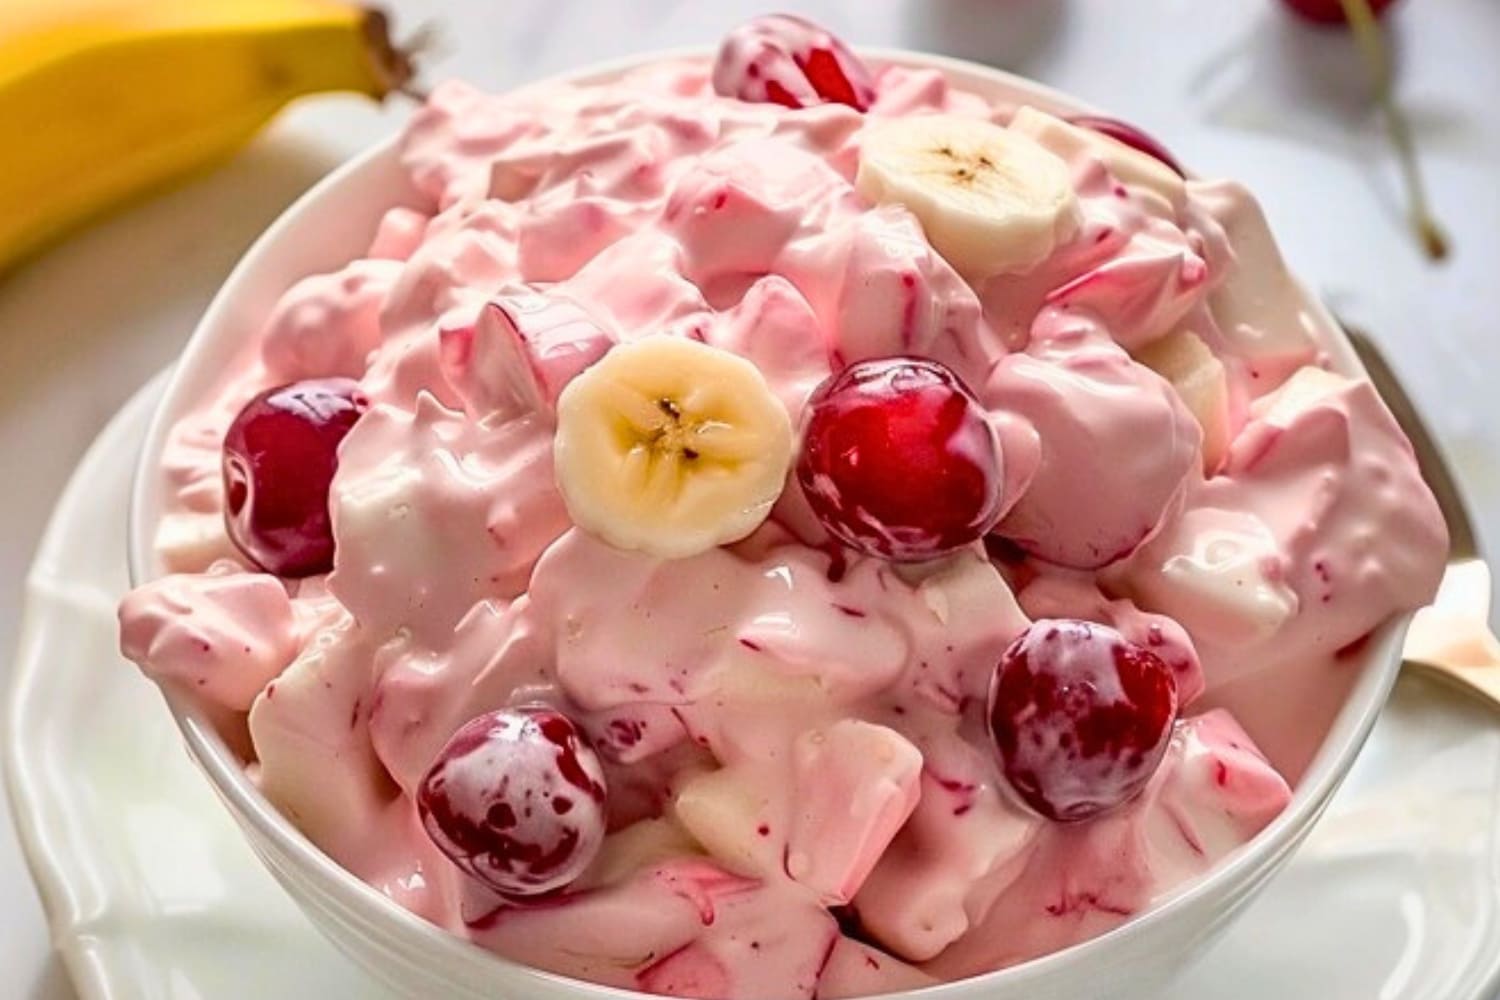 Creamy salad with cherry pie filling and fruit cocktail in a white bowl.